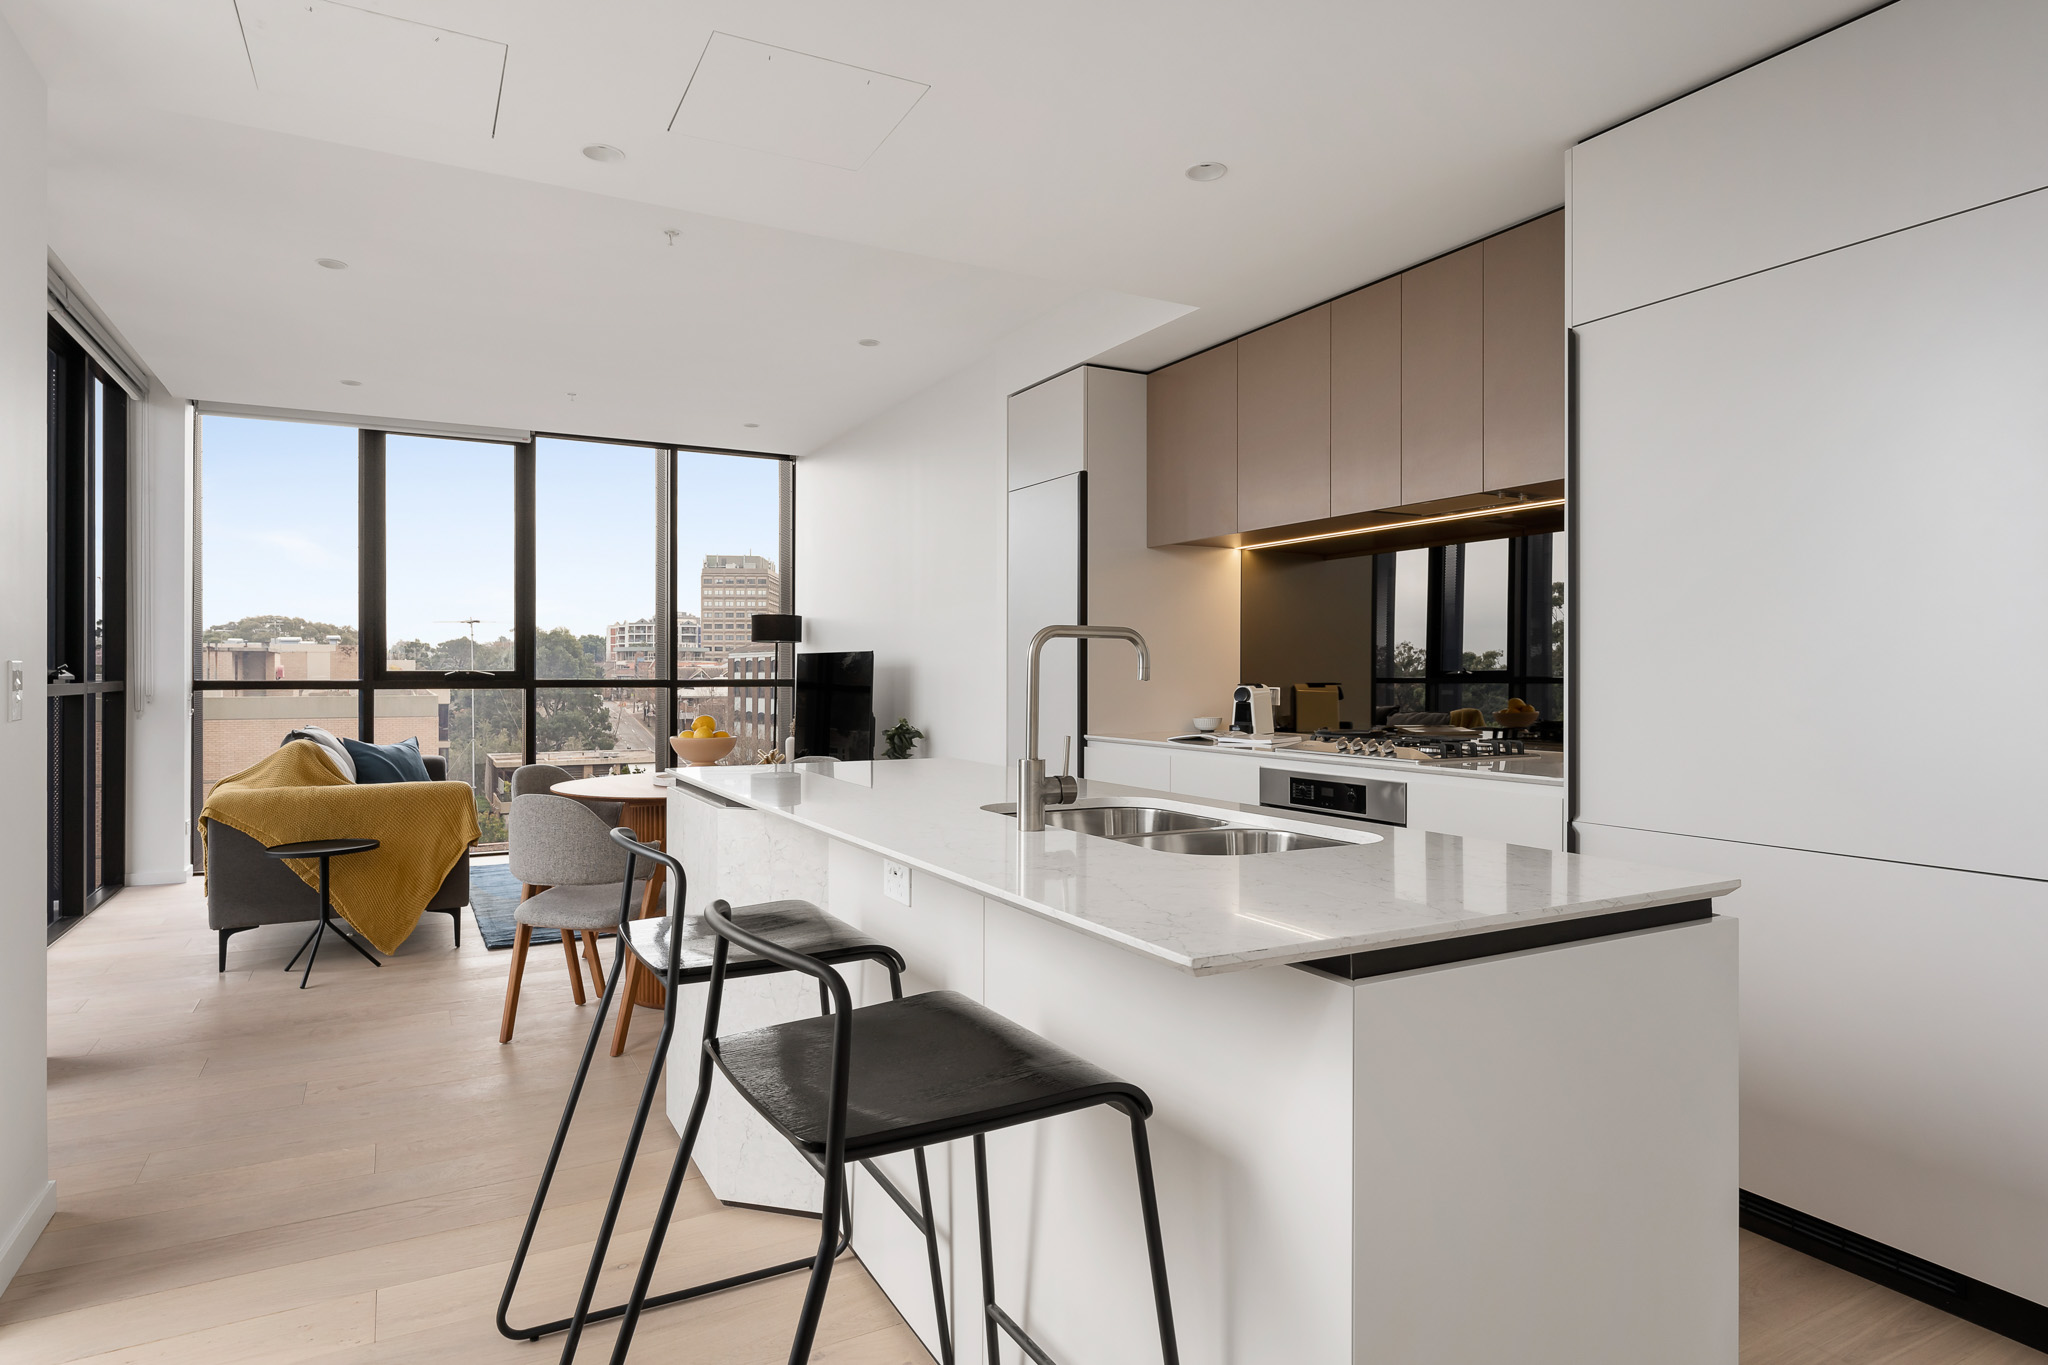 Kitchen - Two Bedroom Apartment With Views - Urban Rest - North Sydney Apartments - Sydney